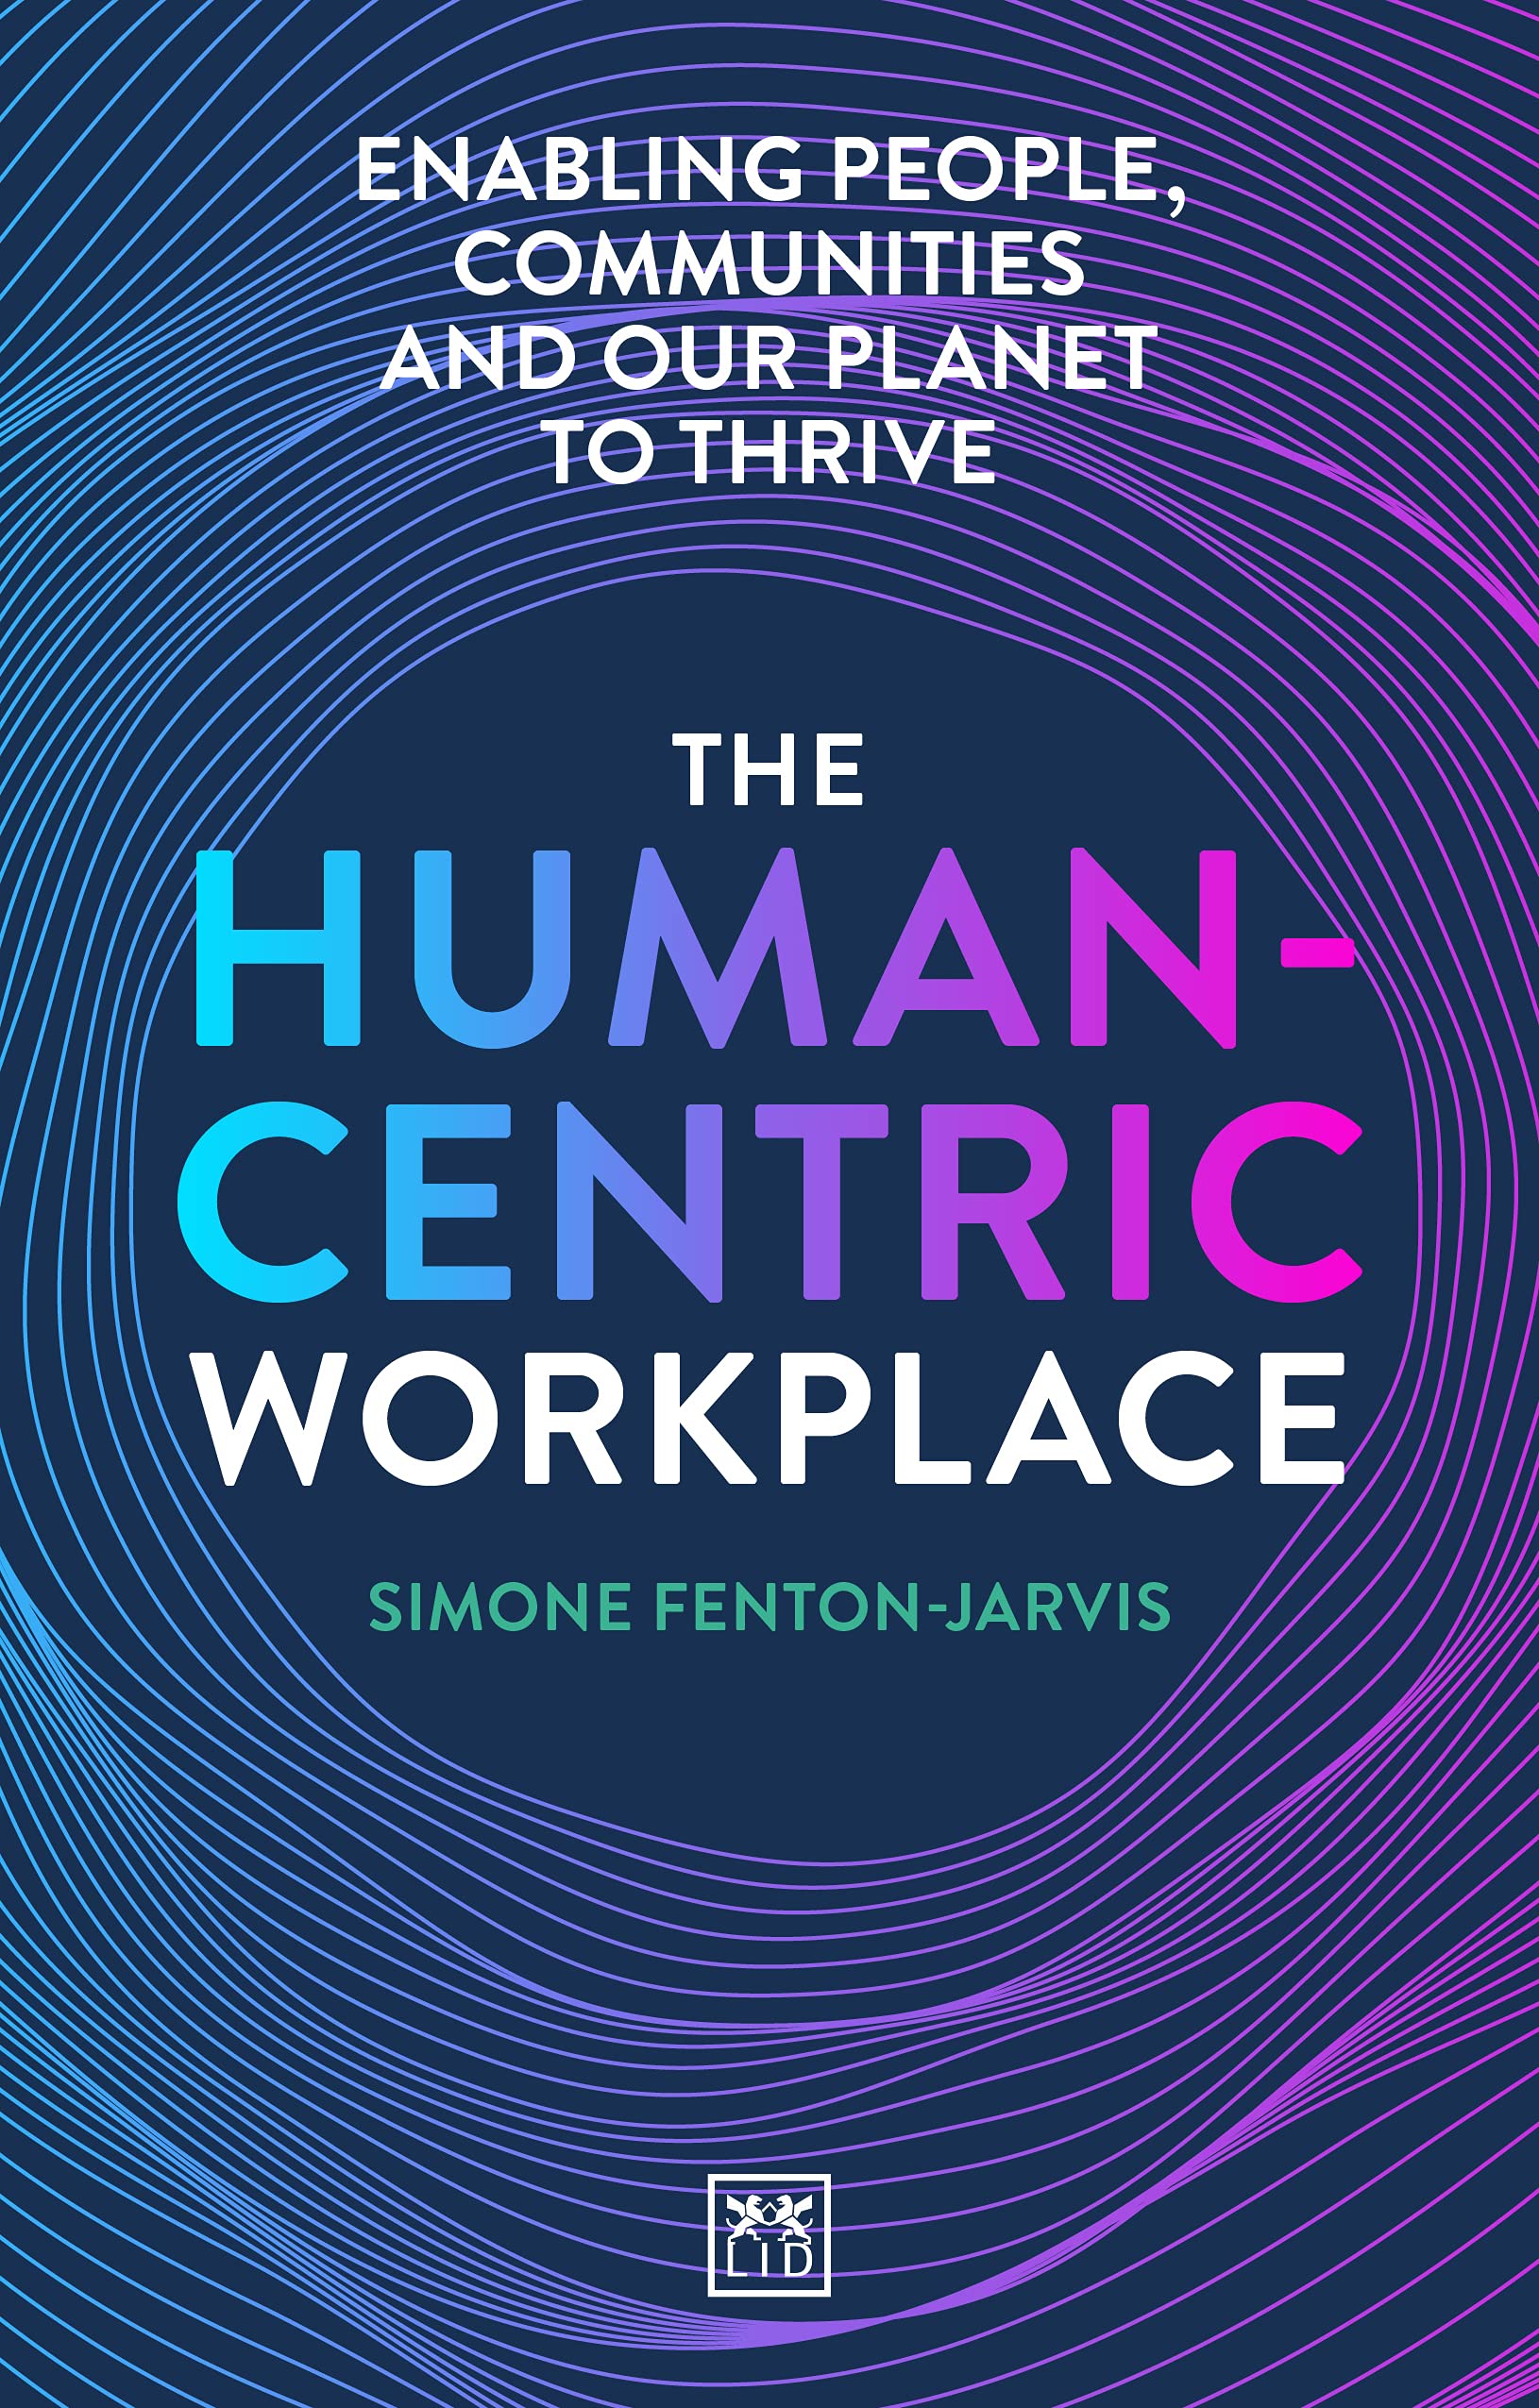 The Human-Centric Workplace